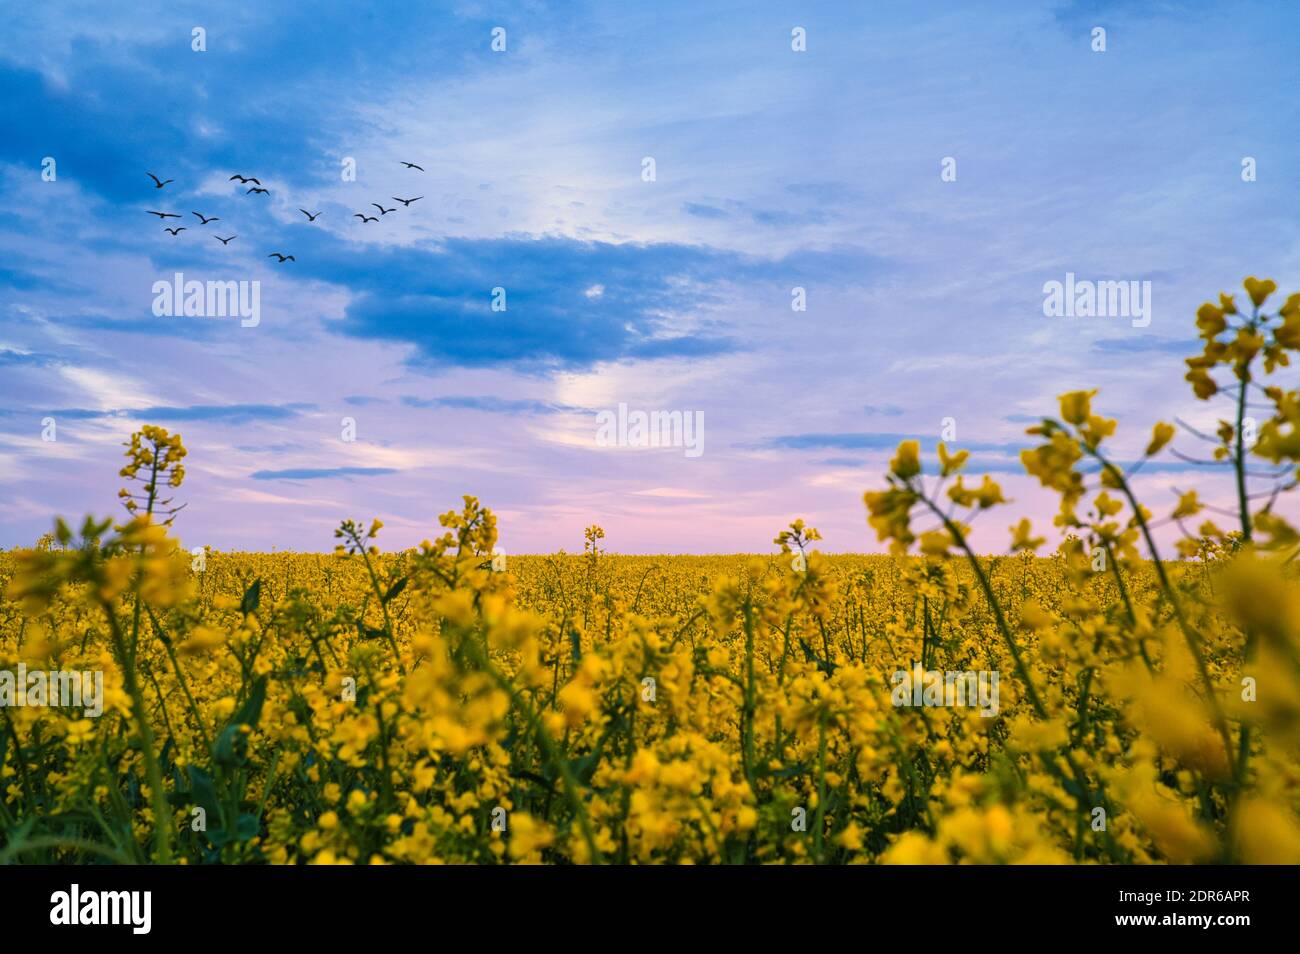 Extensive field with yellow flowering rapeseed. Colorful clouds in the sky, sunset. A landscape full of yellow flowers that plunder the soil in Europe Stock Photo